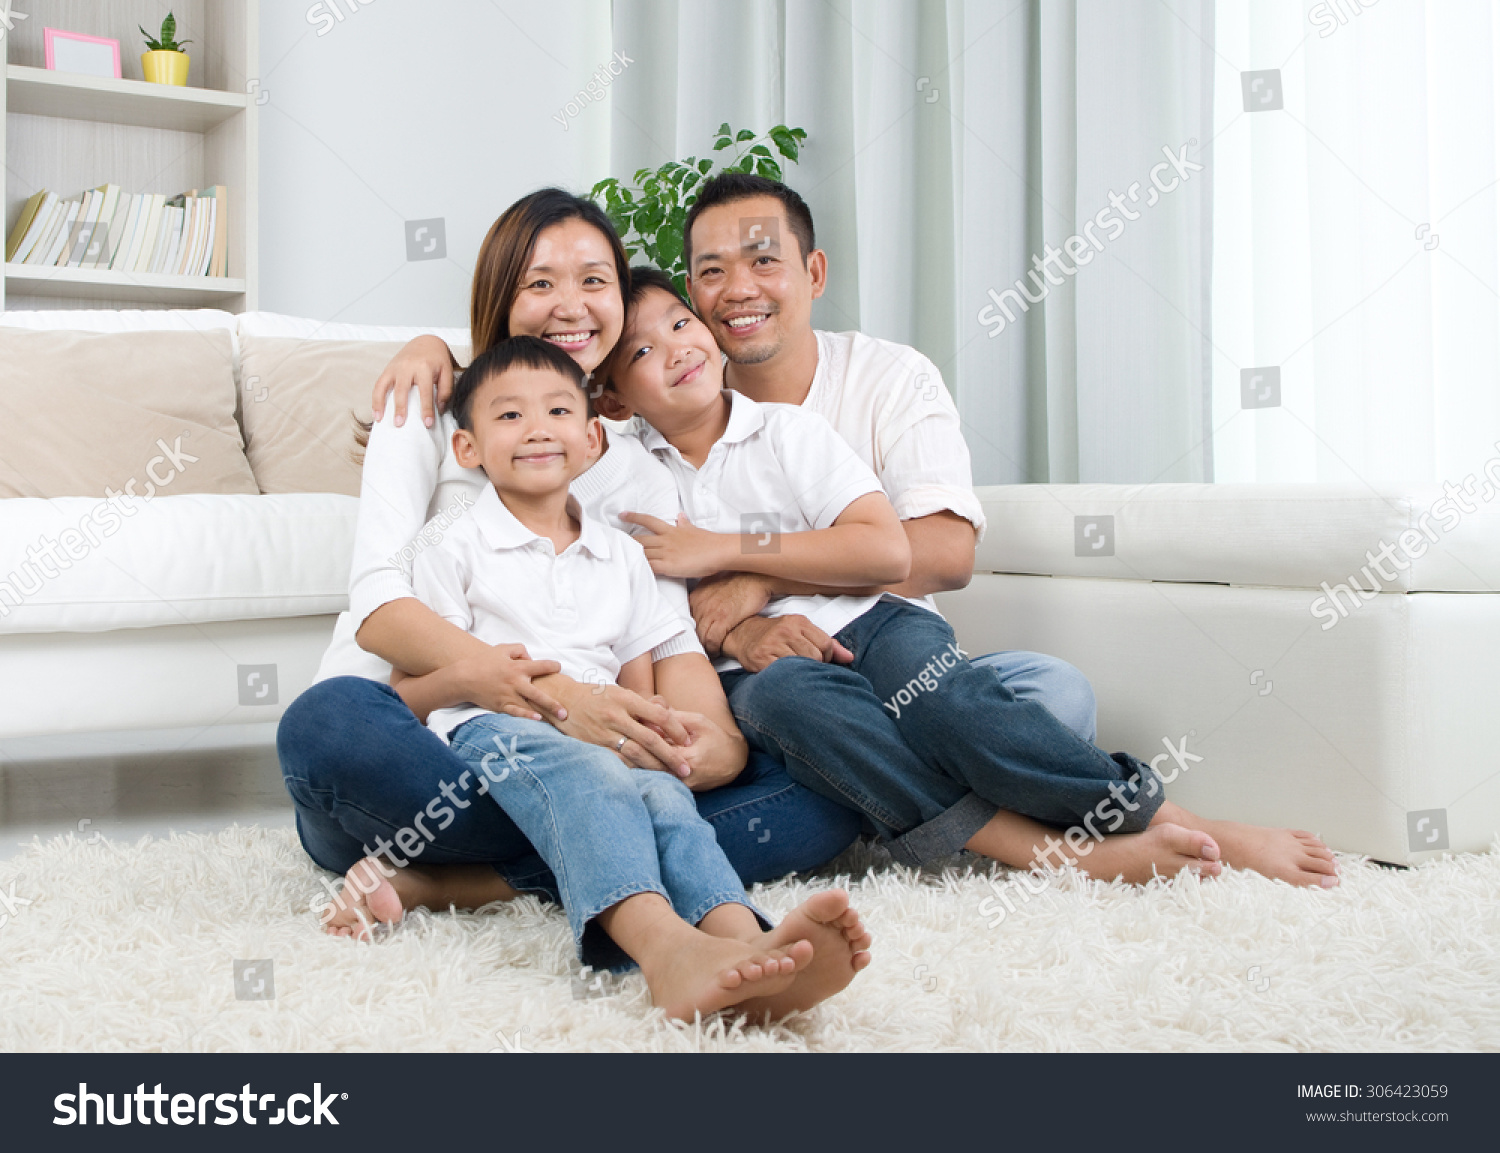 Indoor portrait of asian mixed race family #306423059